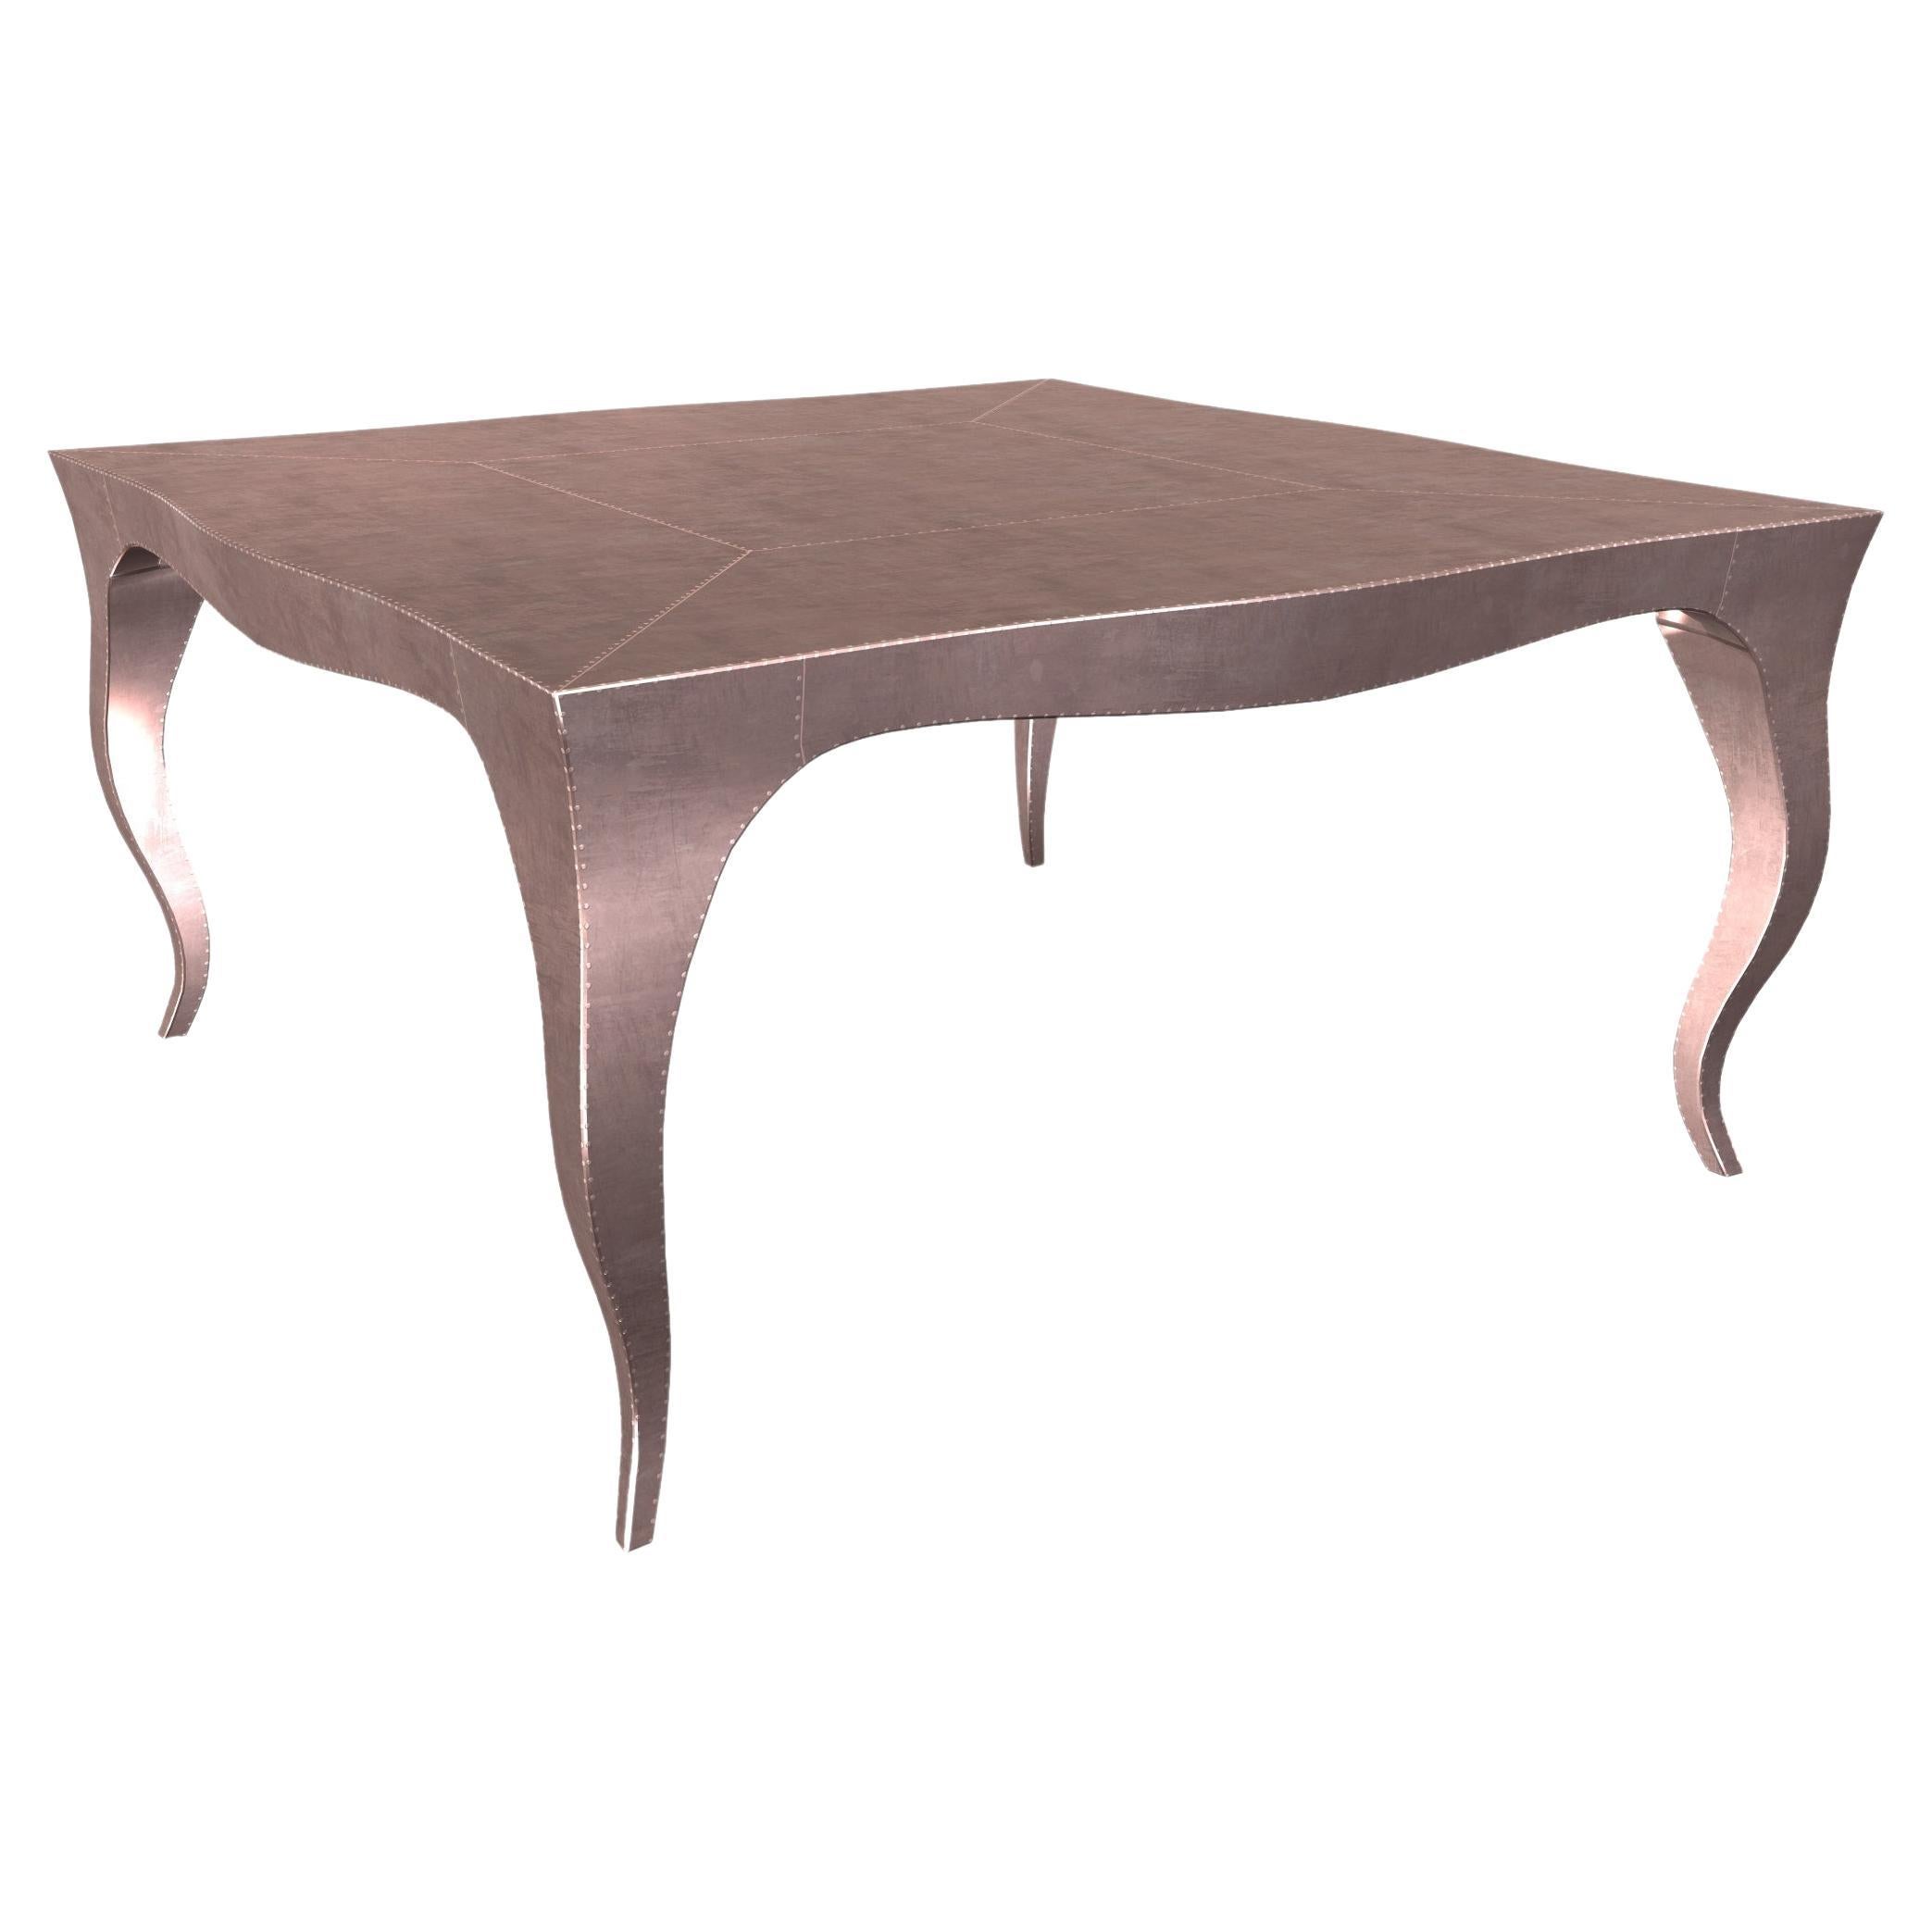 Louise Art Deco Center Tables Smooth Copper 18.5x18.5x10 inch by Paul Mathieu For Sale